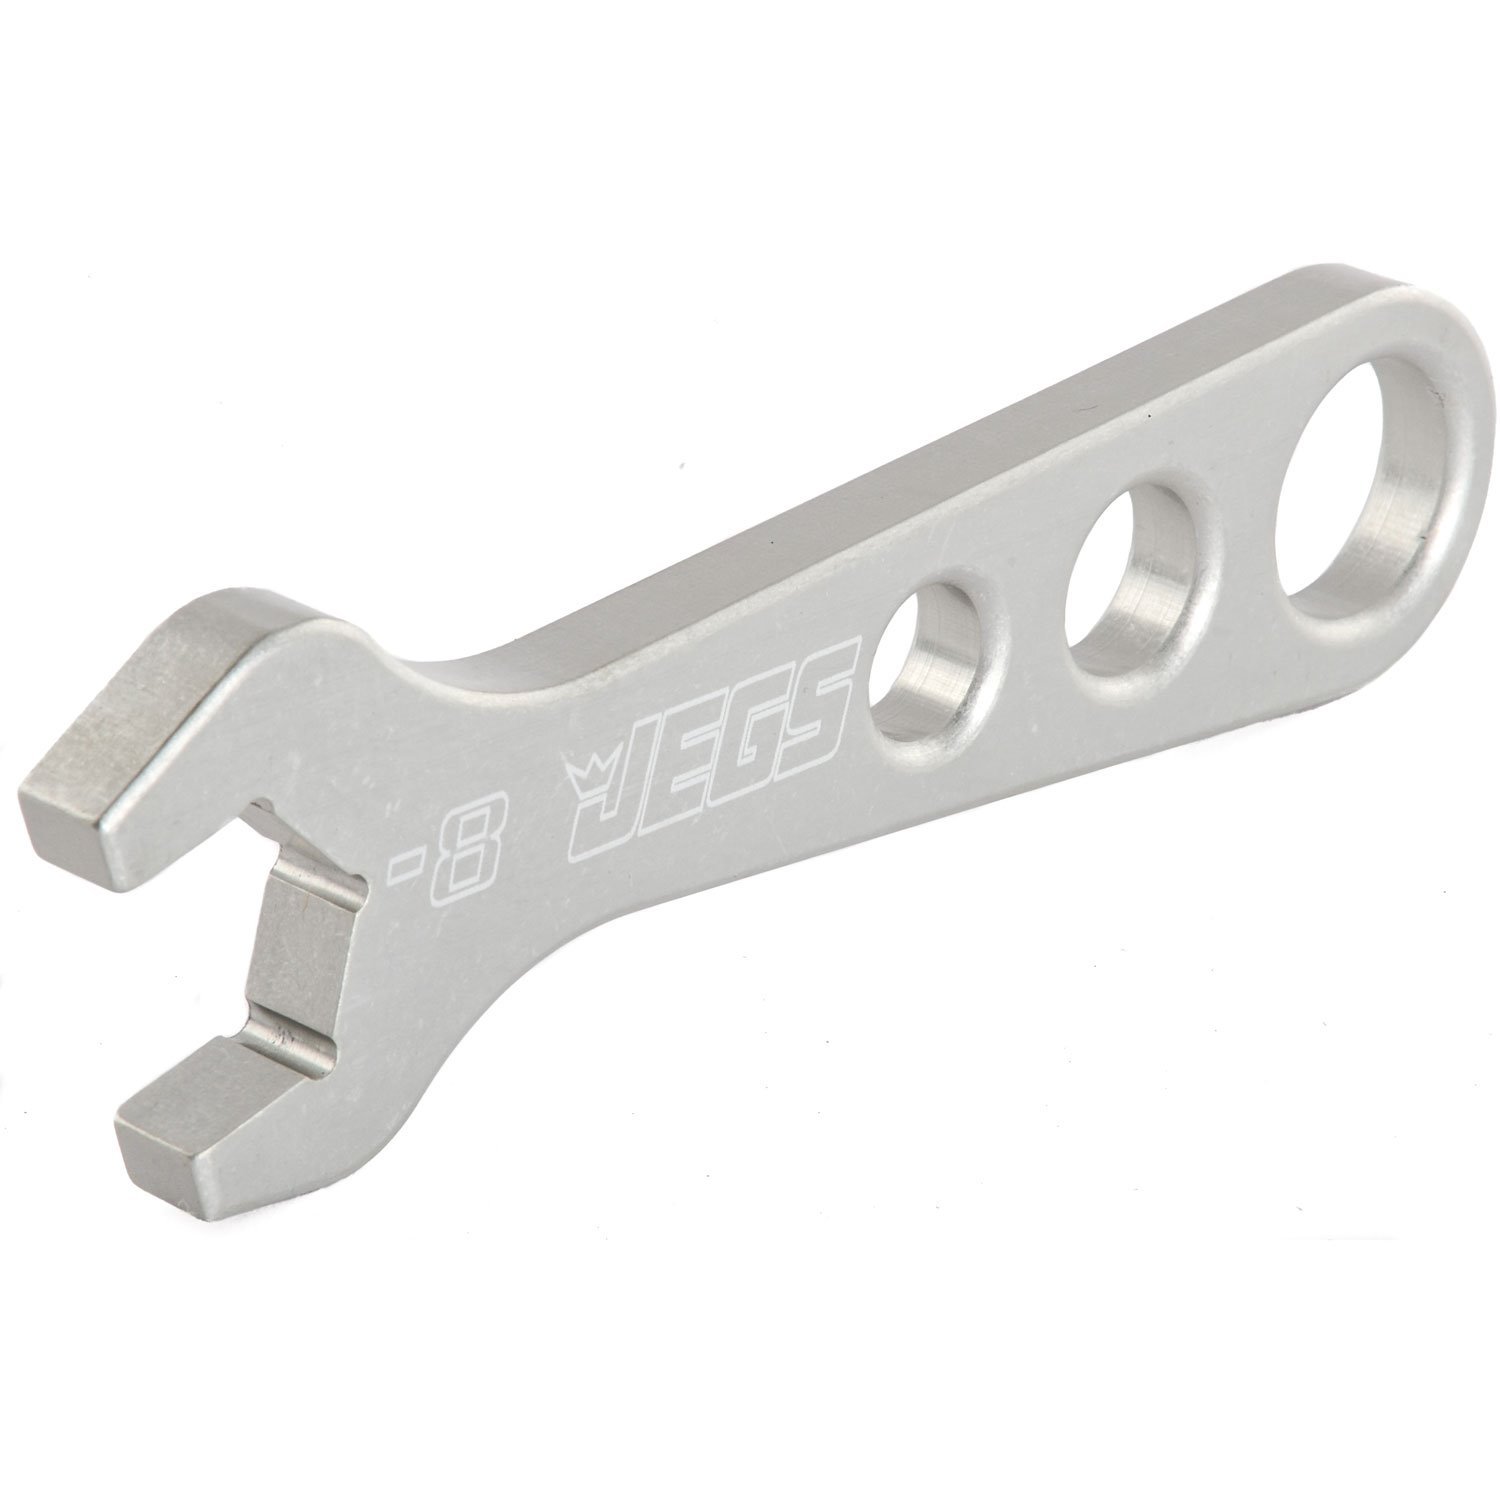 AN Standard Wrench Fits -8AN (7/8 in. Hex)